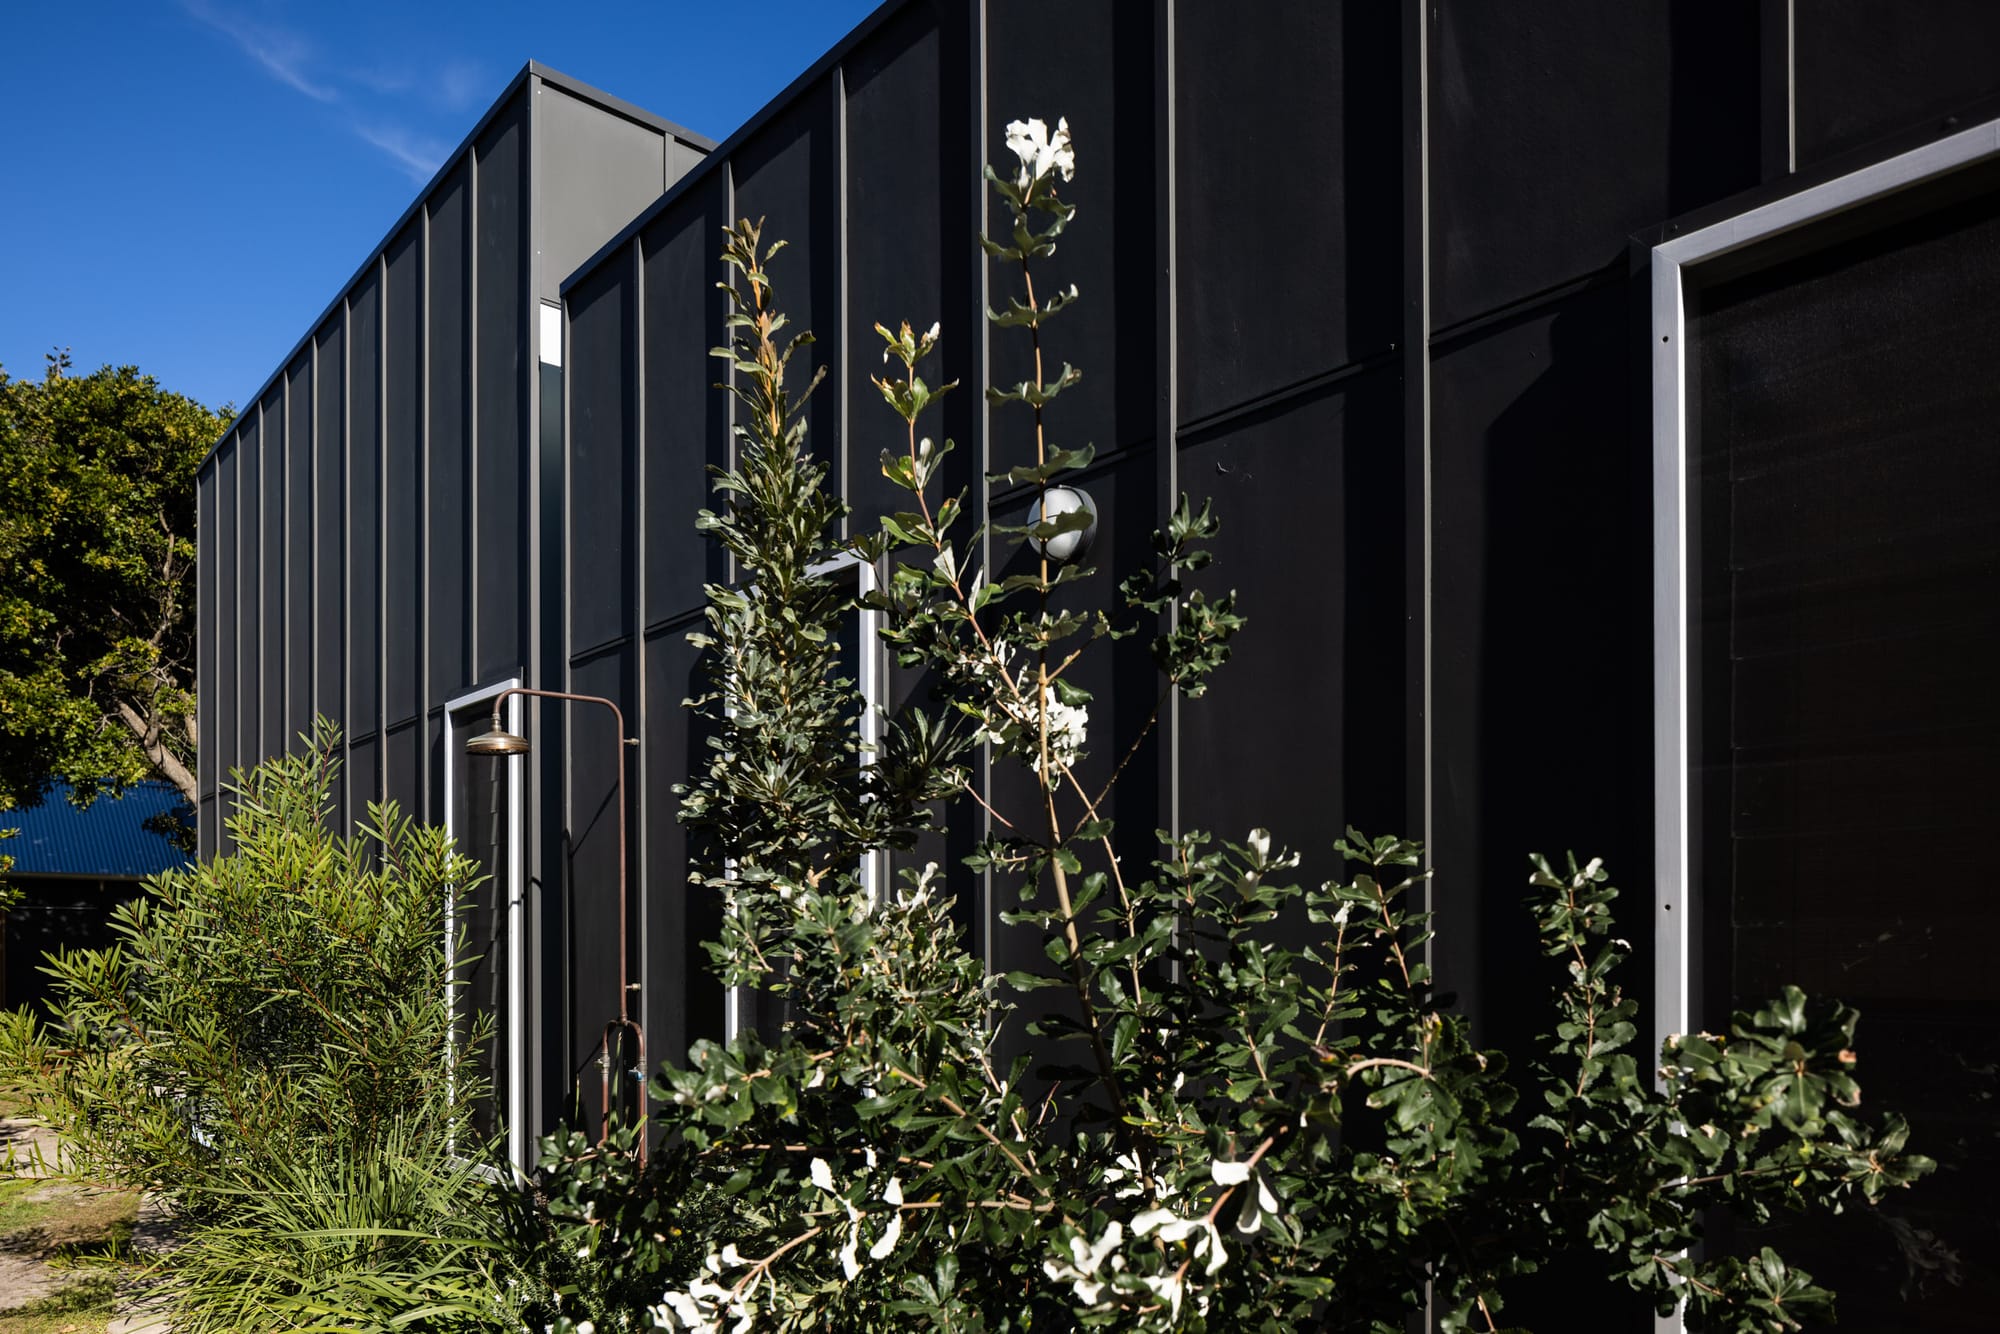 Drip-Dry House by Marker Architect. Exterior shot of black timber clad residential building in minimal, contemporary style. Native Australian plants grow in front of the facade. Rustic outdoor shower can be seen leaning against the exterior walls. 